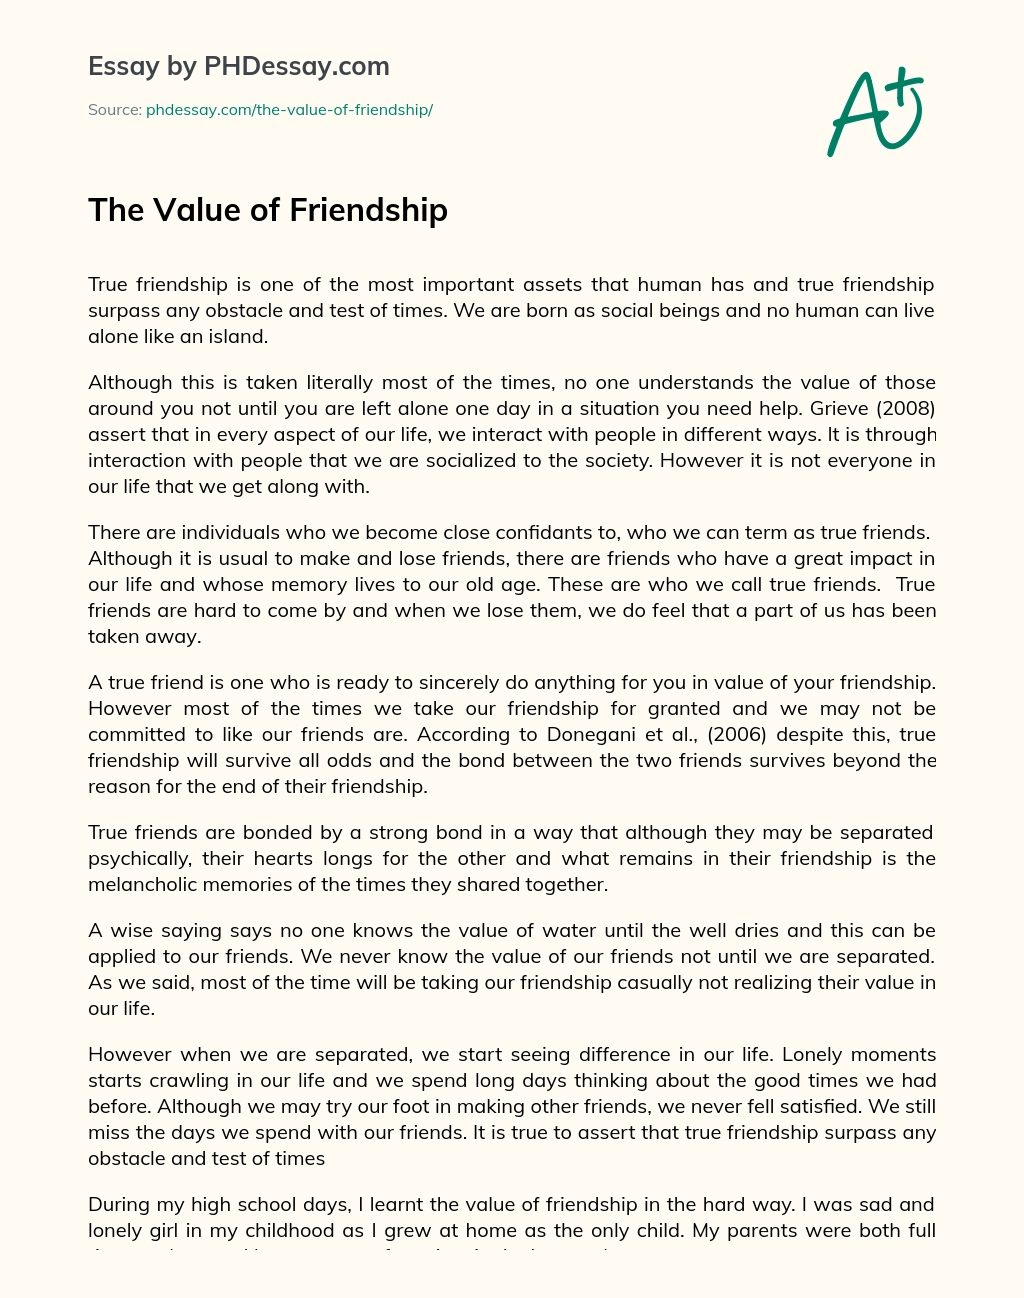 The Value of Friendship essay